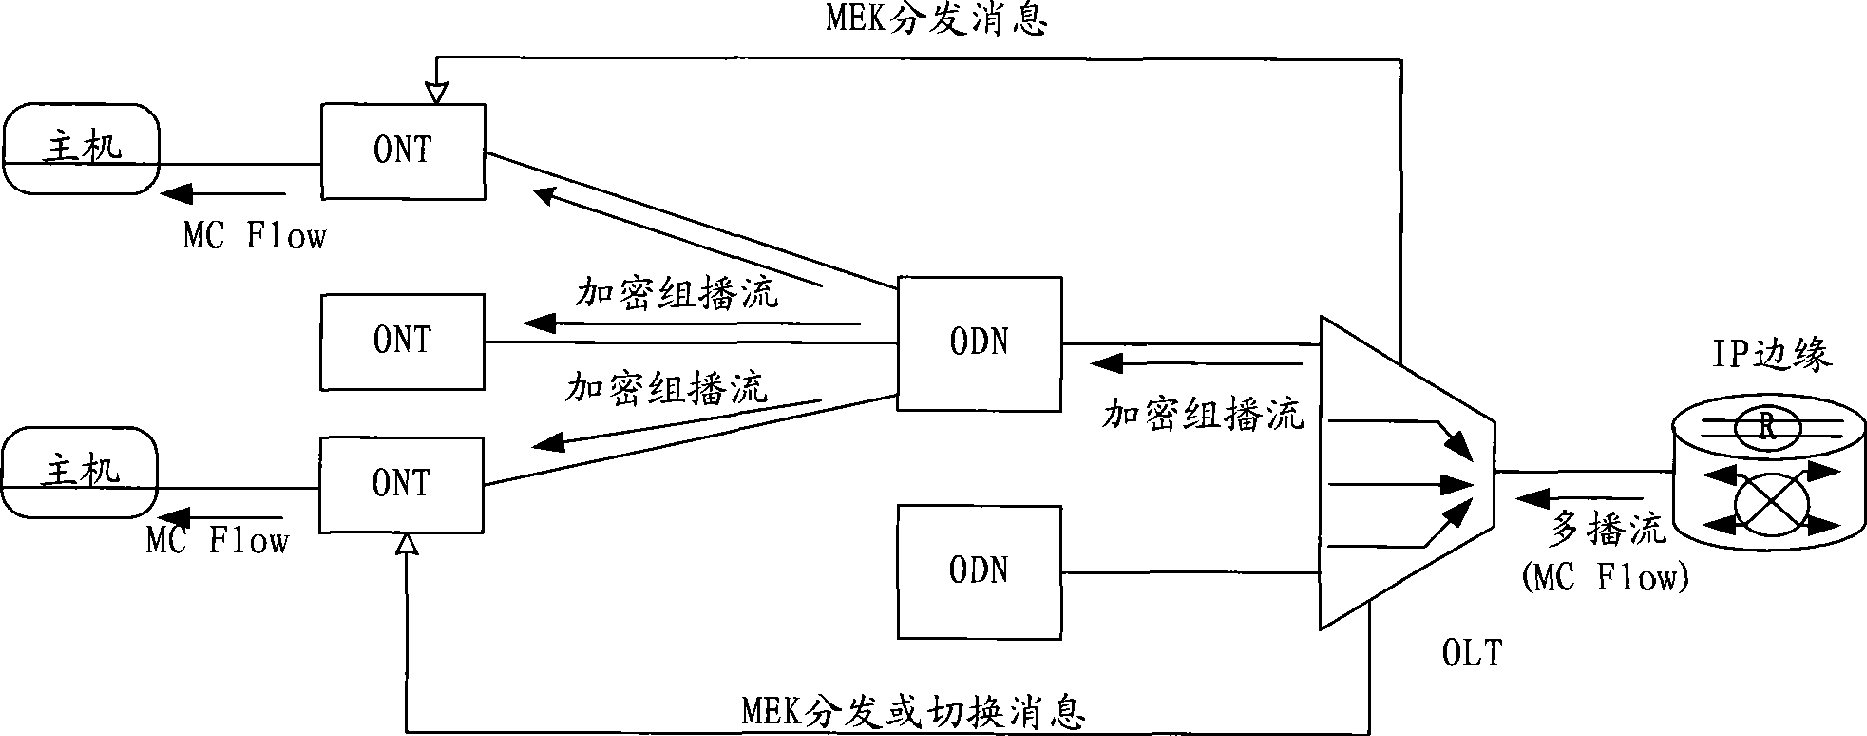 Method, system and device for broadband access network multicast control